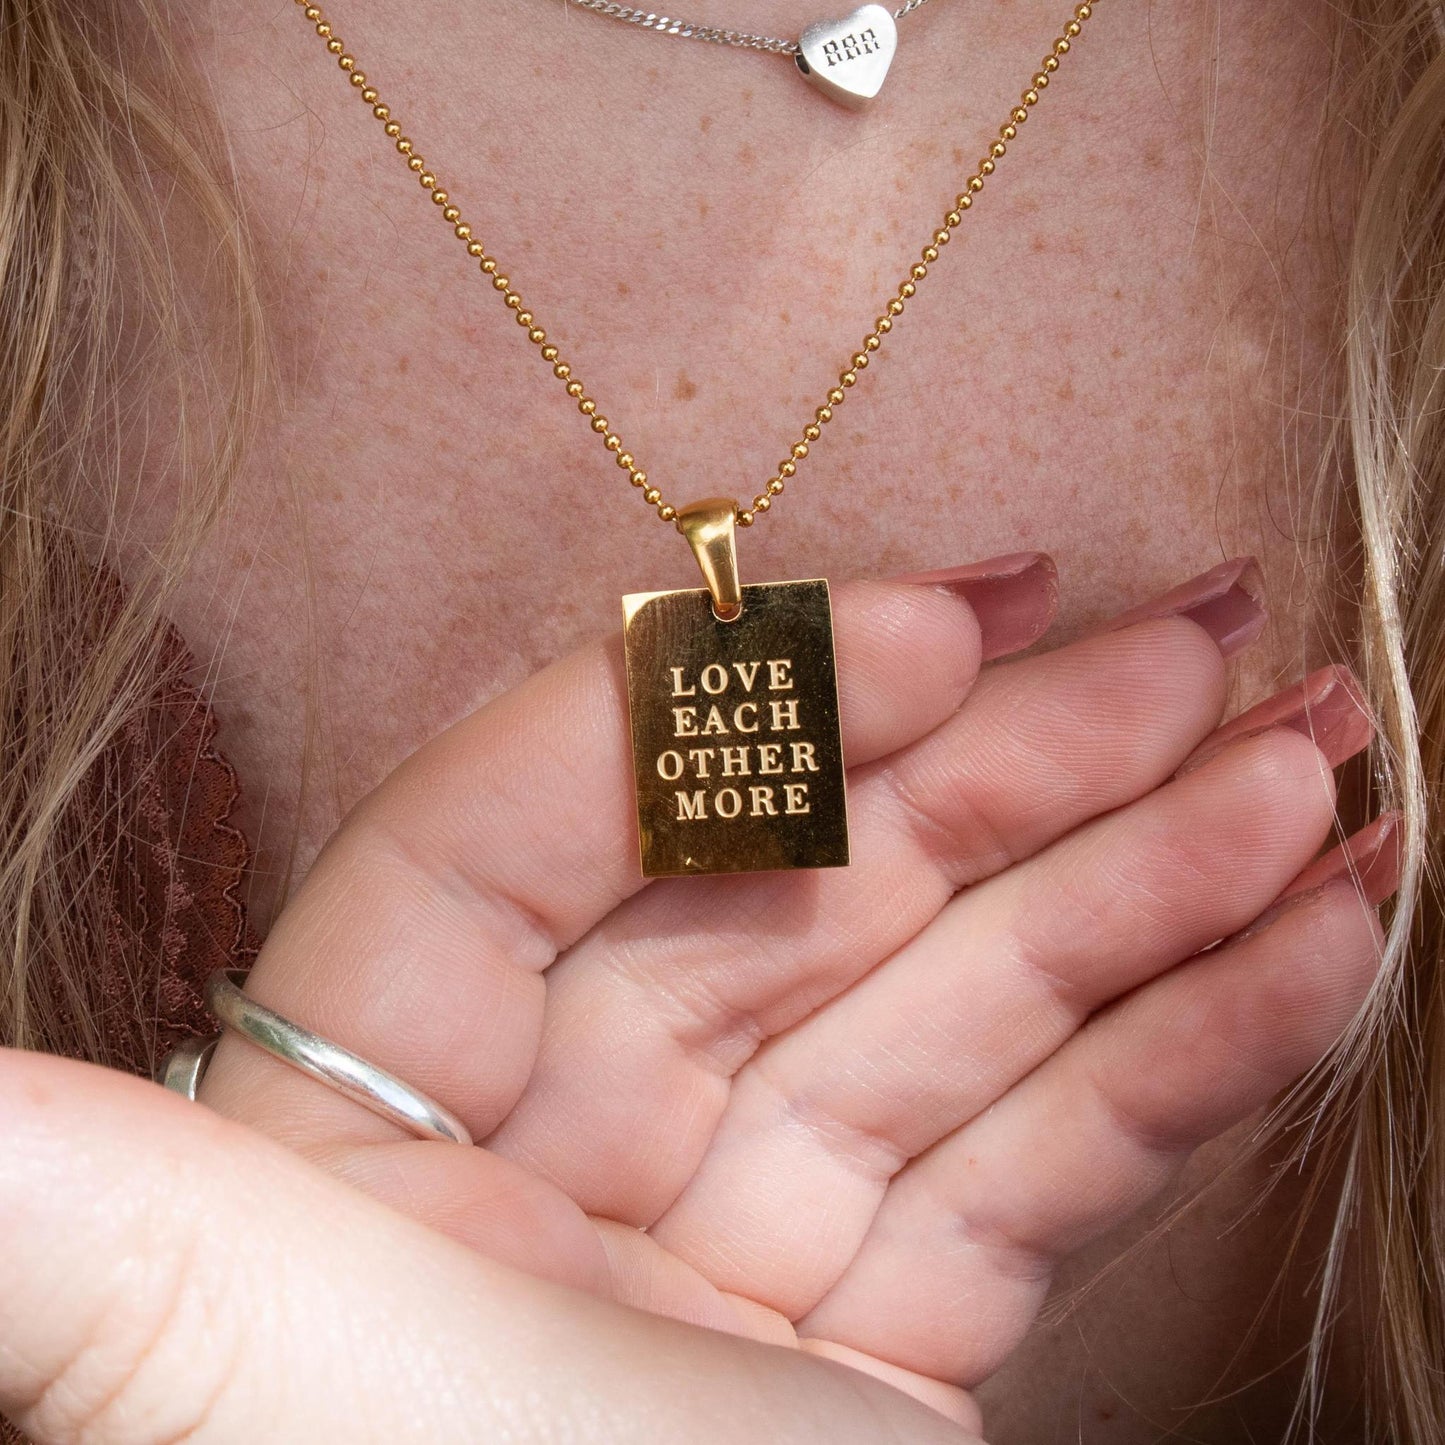 love each other more, love necklace, love jewelry, love each other necklace, gold plated necklace